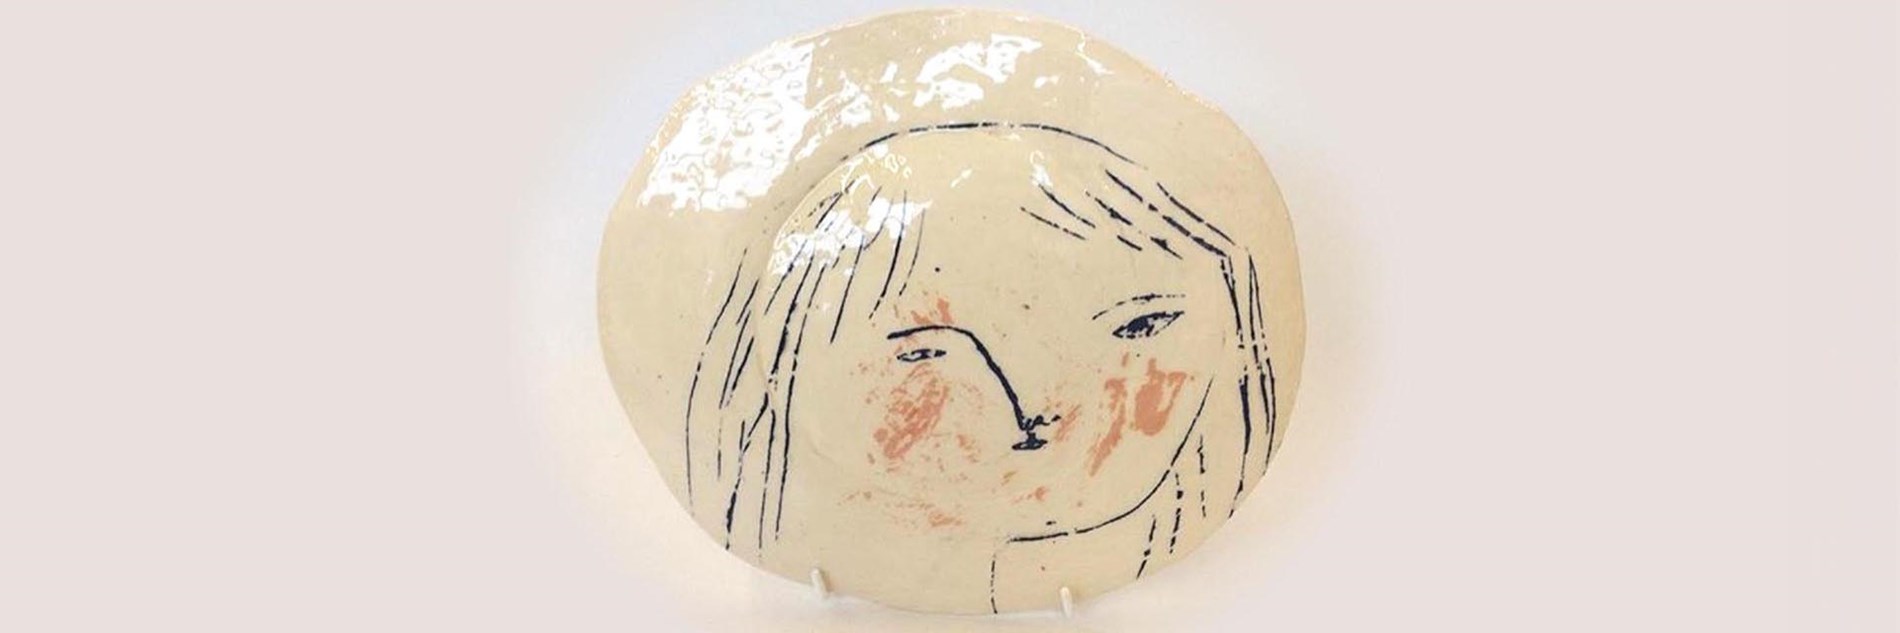 Ceramic glazed plate with a hand-drawn illustration of a face